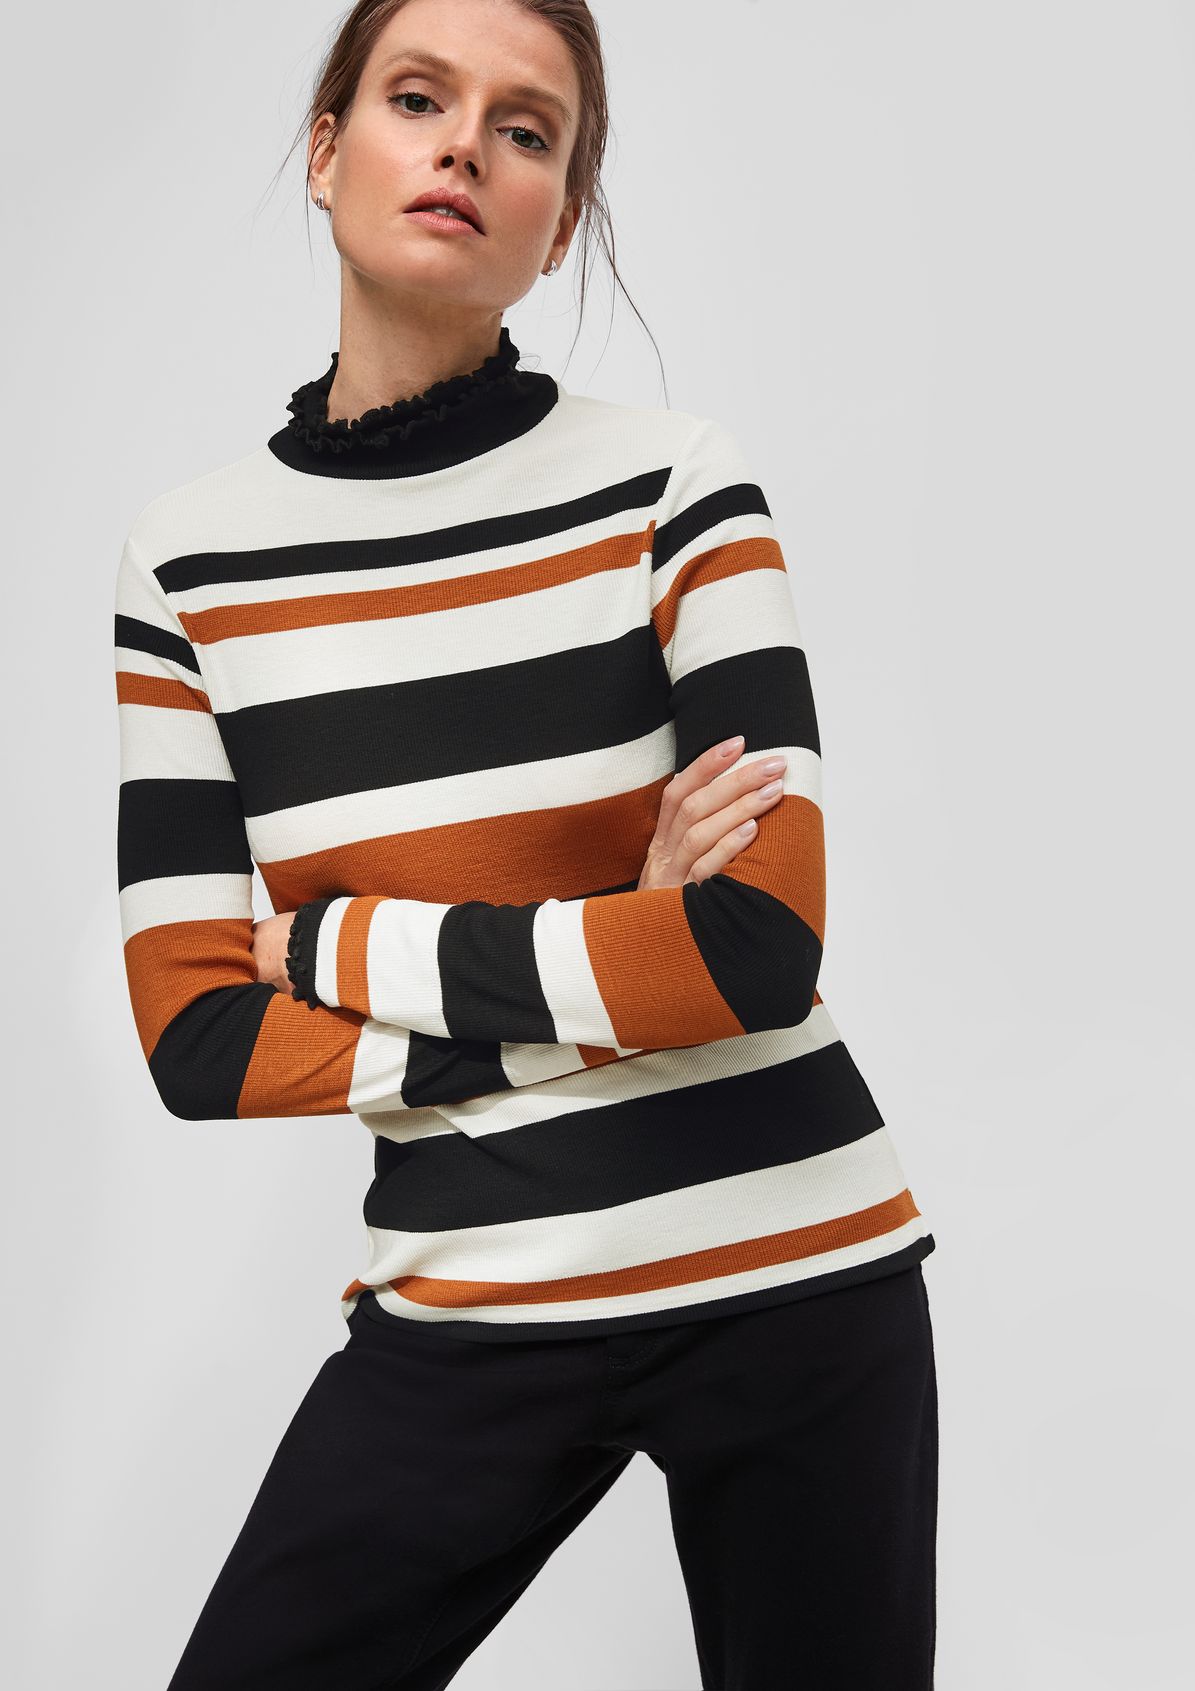 Long sleeve top in stretch viscose from comma